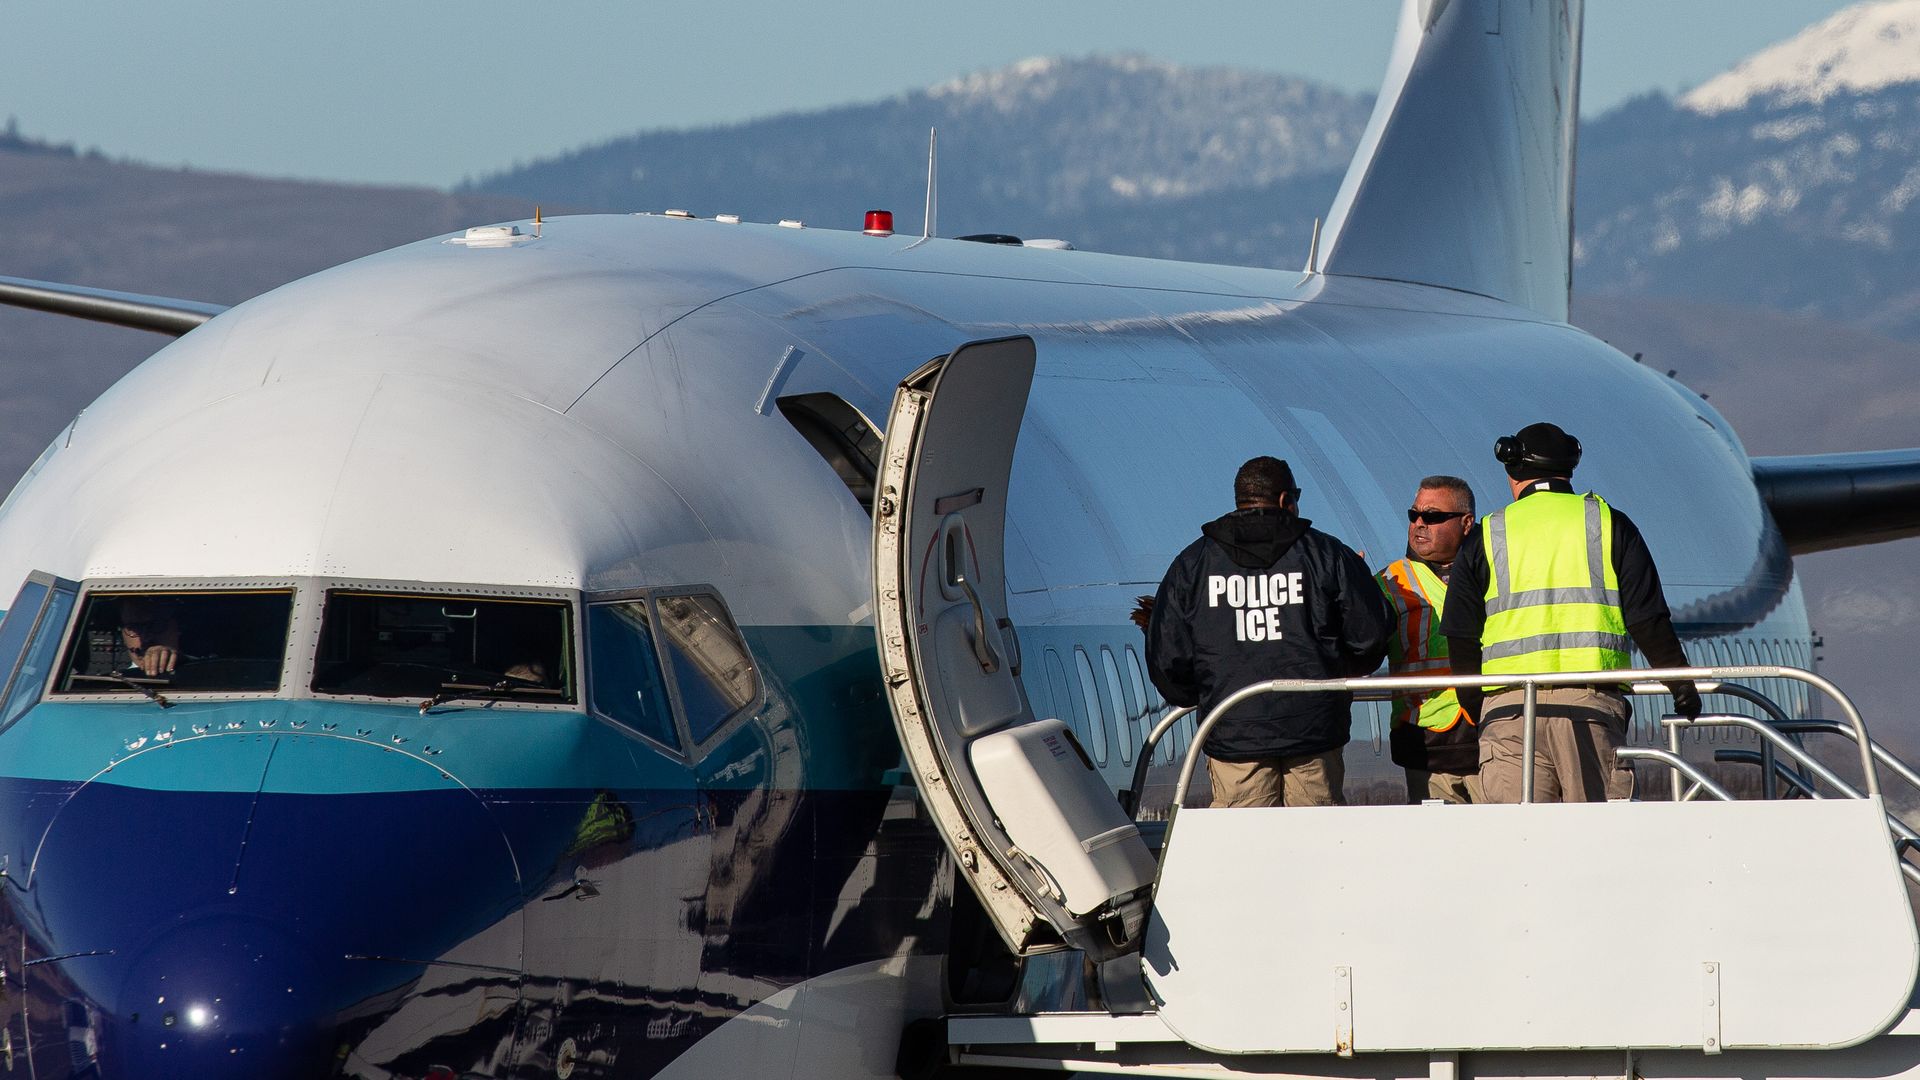 gents working for U.S. Immigration and Customs Enforcement (ICE) prepare to board detainees onto a Swift Air charter flight at McCormick Air Center 